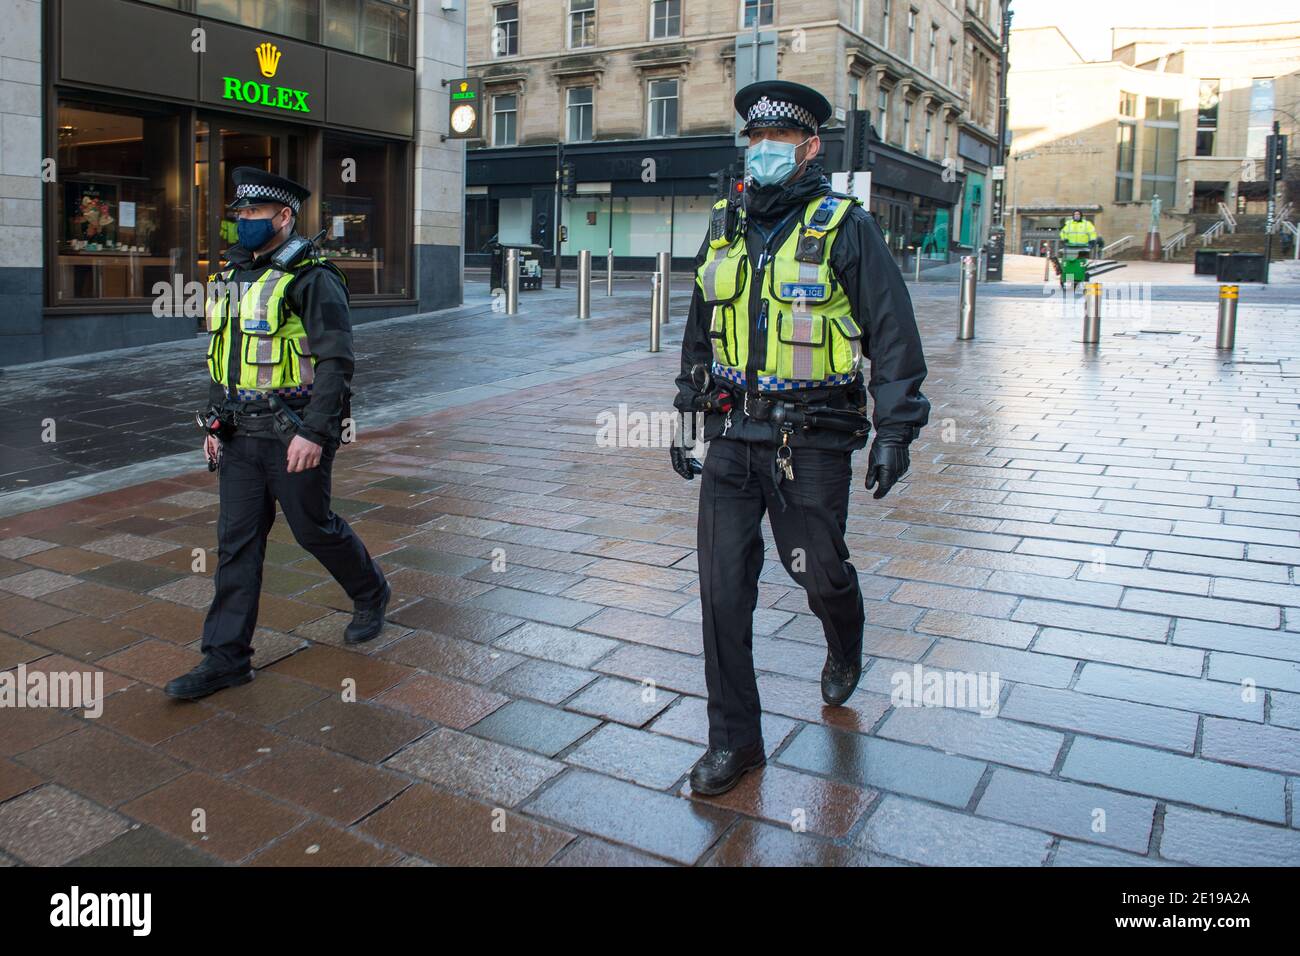 Glasgow, Scotland, UK. 5th Jan, 2021. Pictured: Police Scotland officers wearing high viz are making a highly visible presence to enforce the lockdown. Glasgow City centre looks empty and deserted during the first day Scotland is put into another lockdown. As of 00:01 this morning Scotland has been placed into another lockdown as per the Scottish First Minister's address at 2pm yesterday. Only essential travel is allowed such as going to work and essential food shopping and exercise, other than that everyone must stay in their homes. Credit: Colin Fisher/Alamy Live News Stock Photo